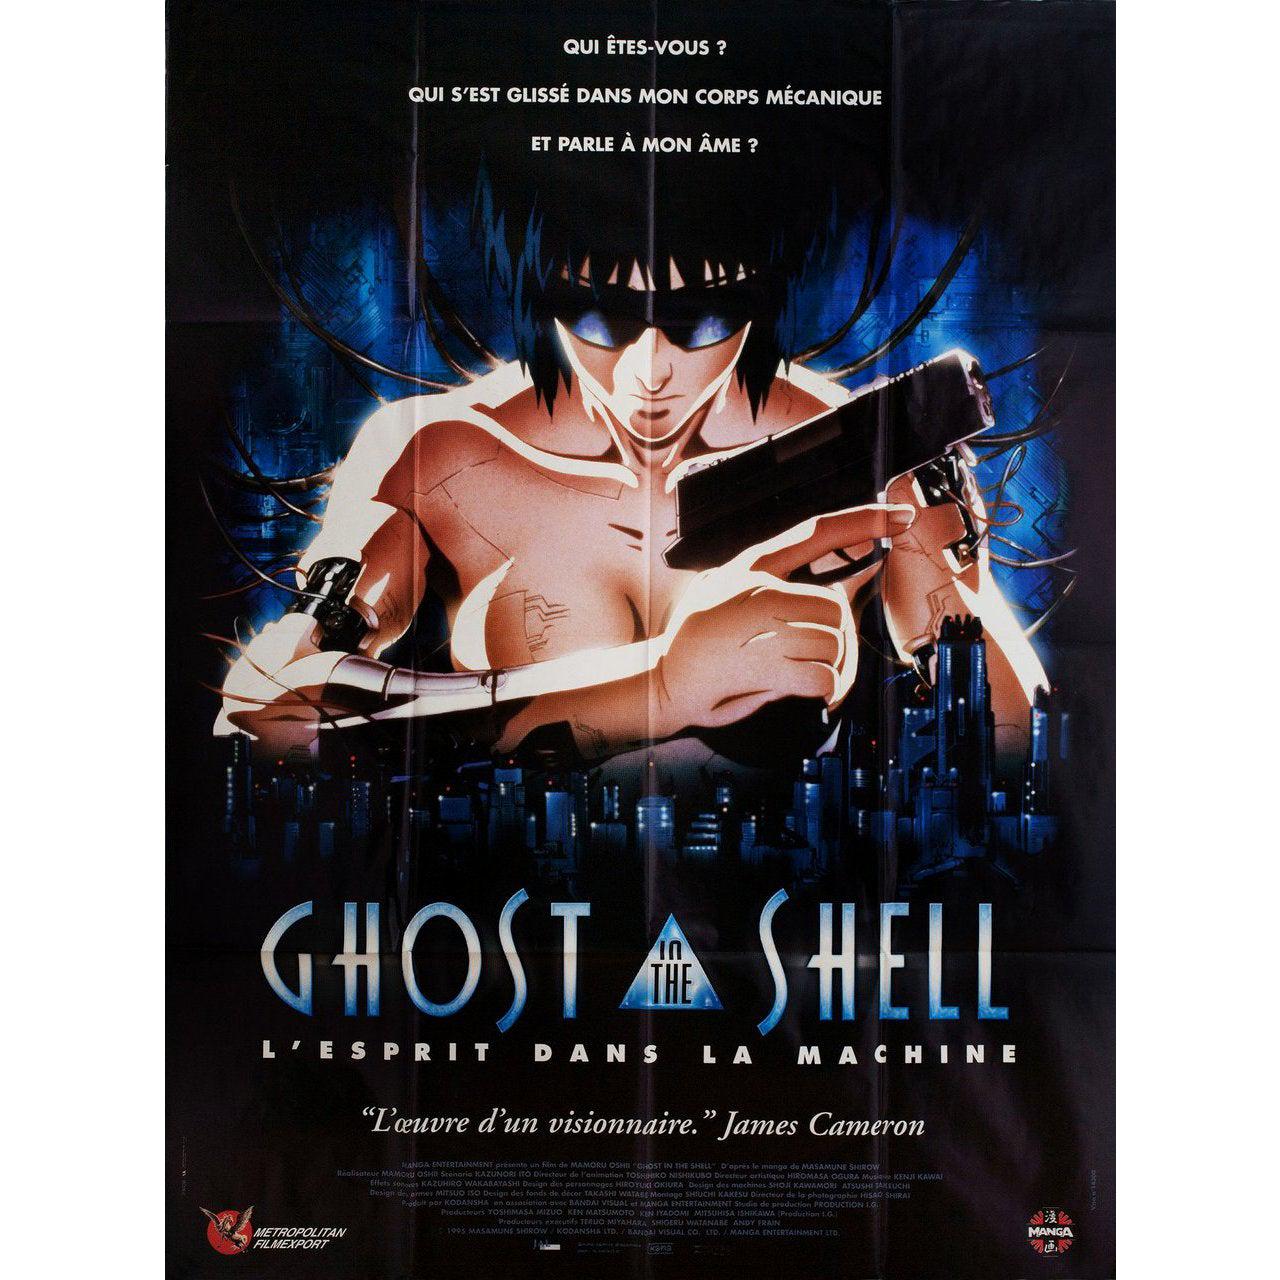 Ghost in the Shell 1995 French Grande Film Poster